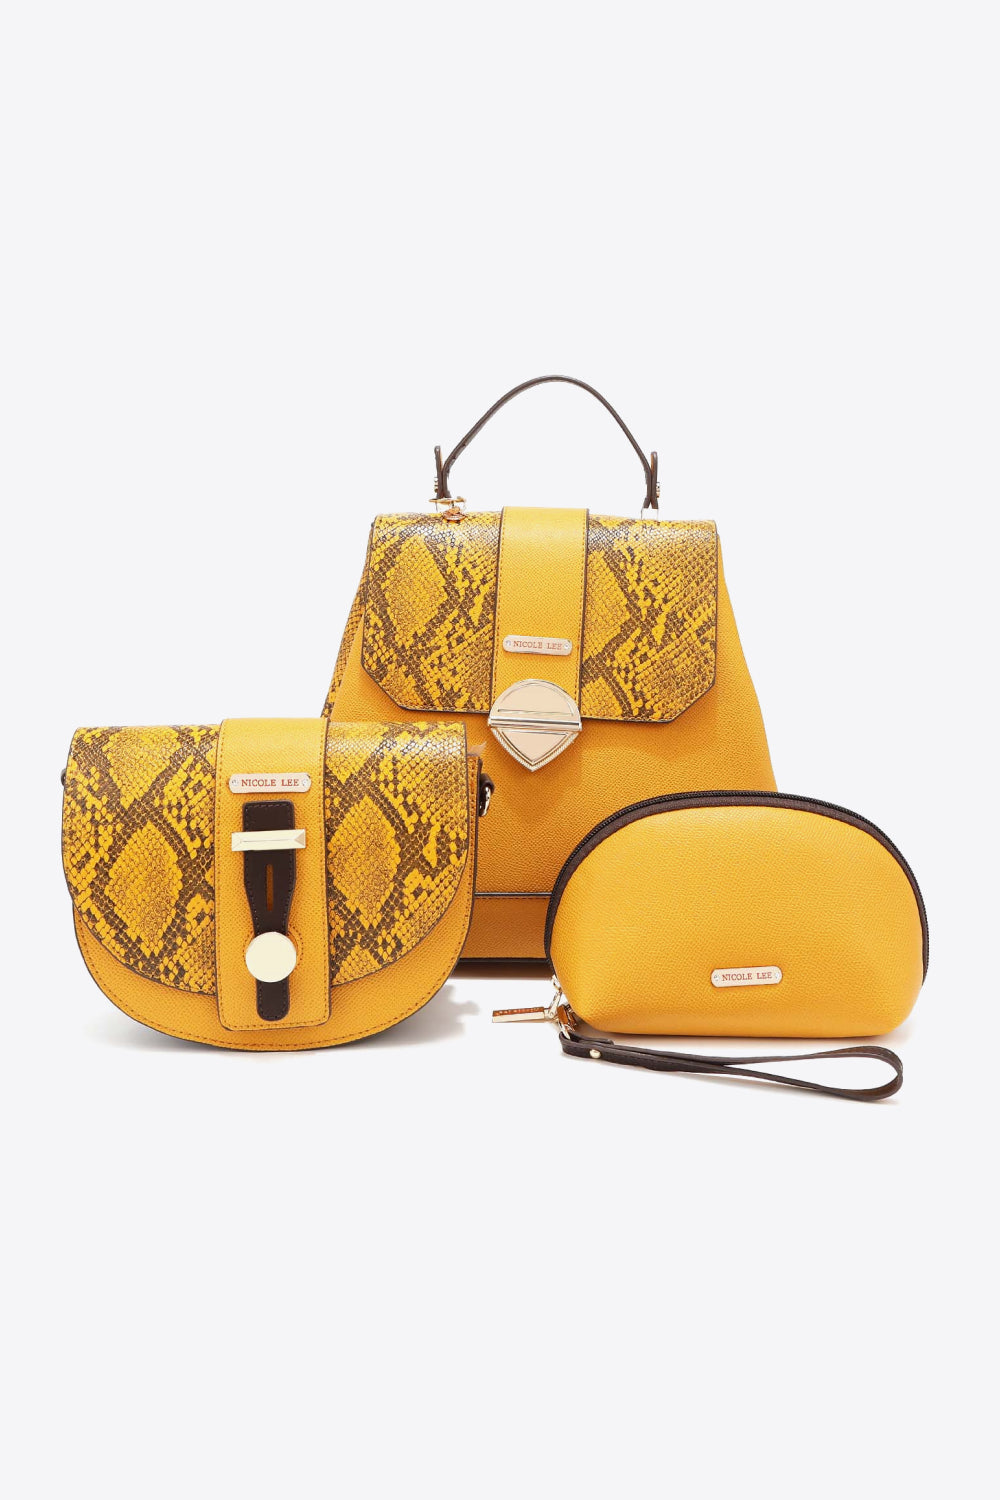 FREE GIFT WITH $150 PURCHASE Python Bag 3-Piece Set